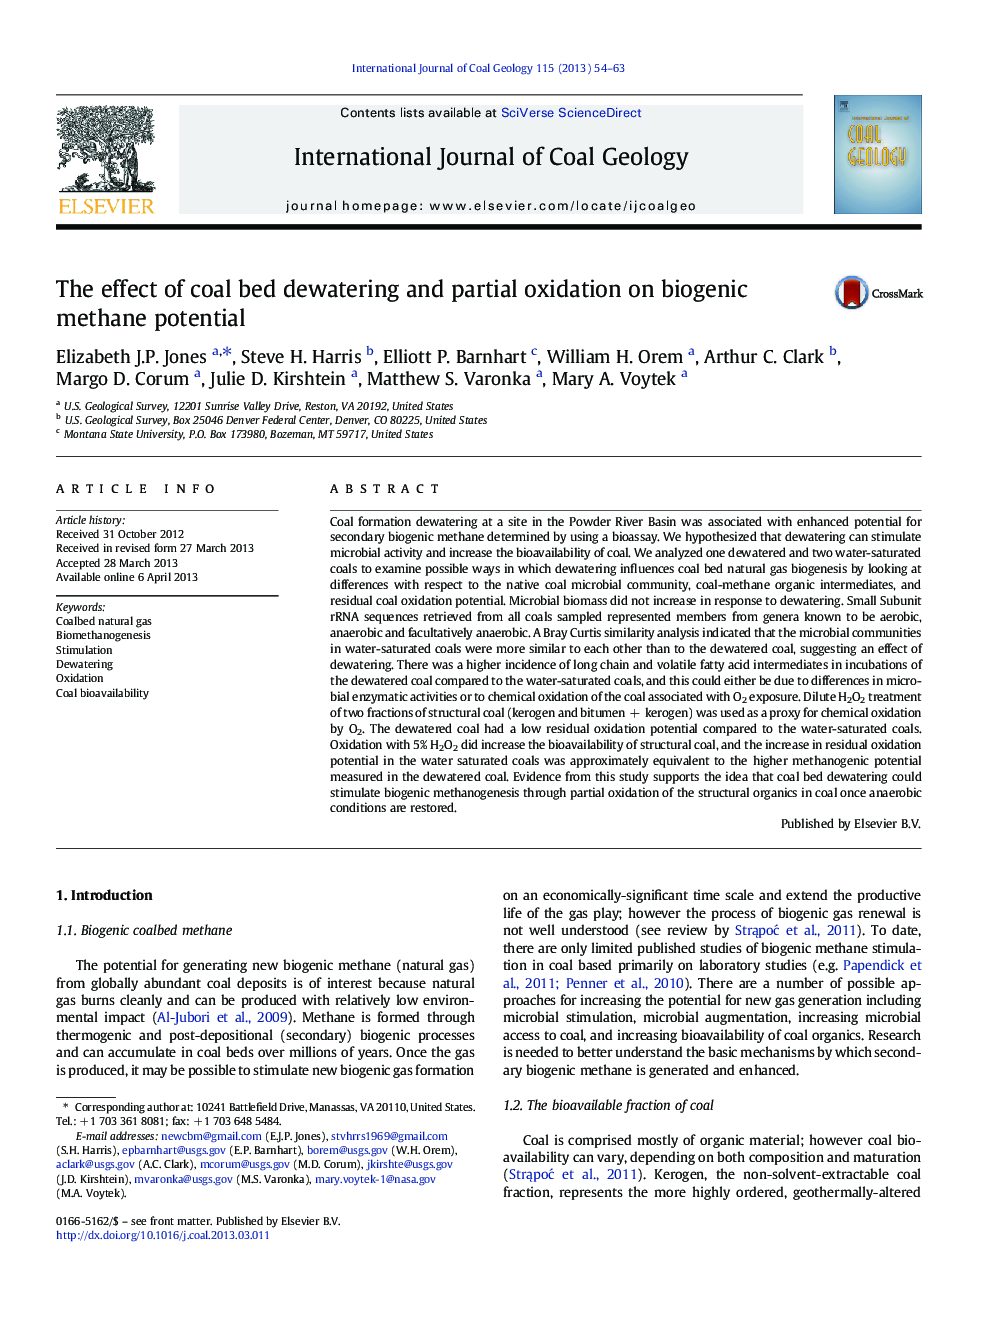 The effect of coal bed dewatering and partial oxidation on biogenic methane potential